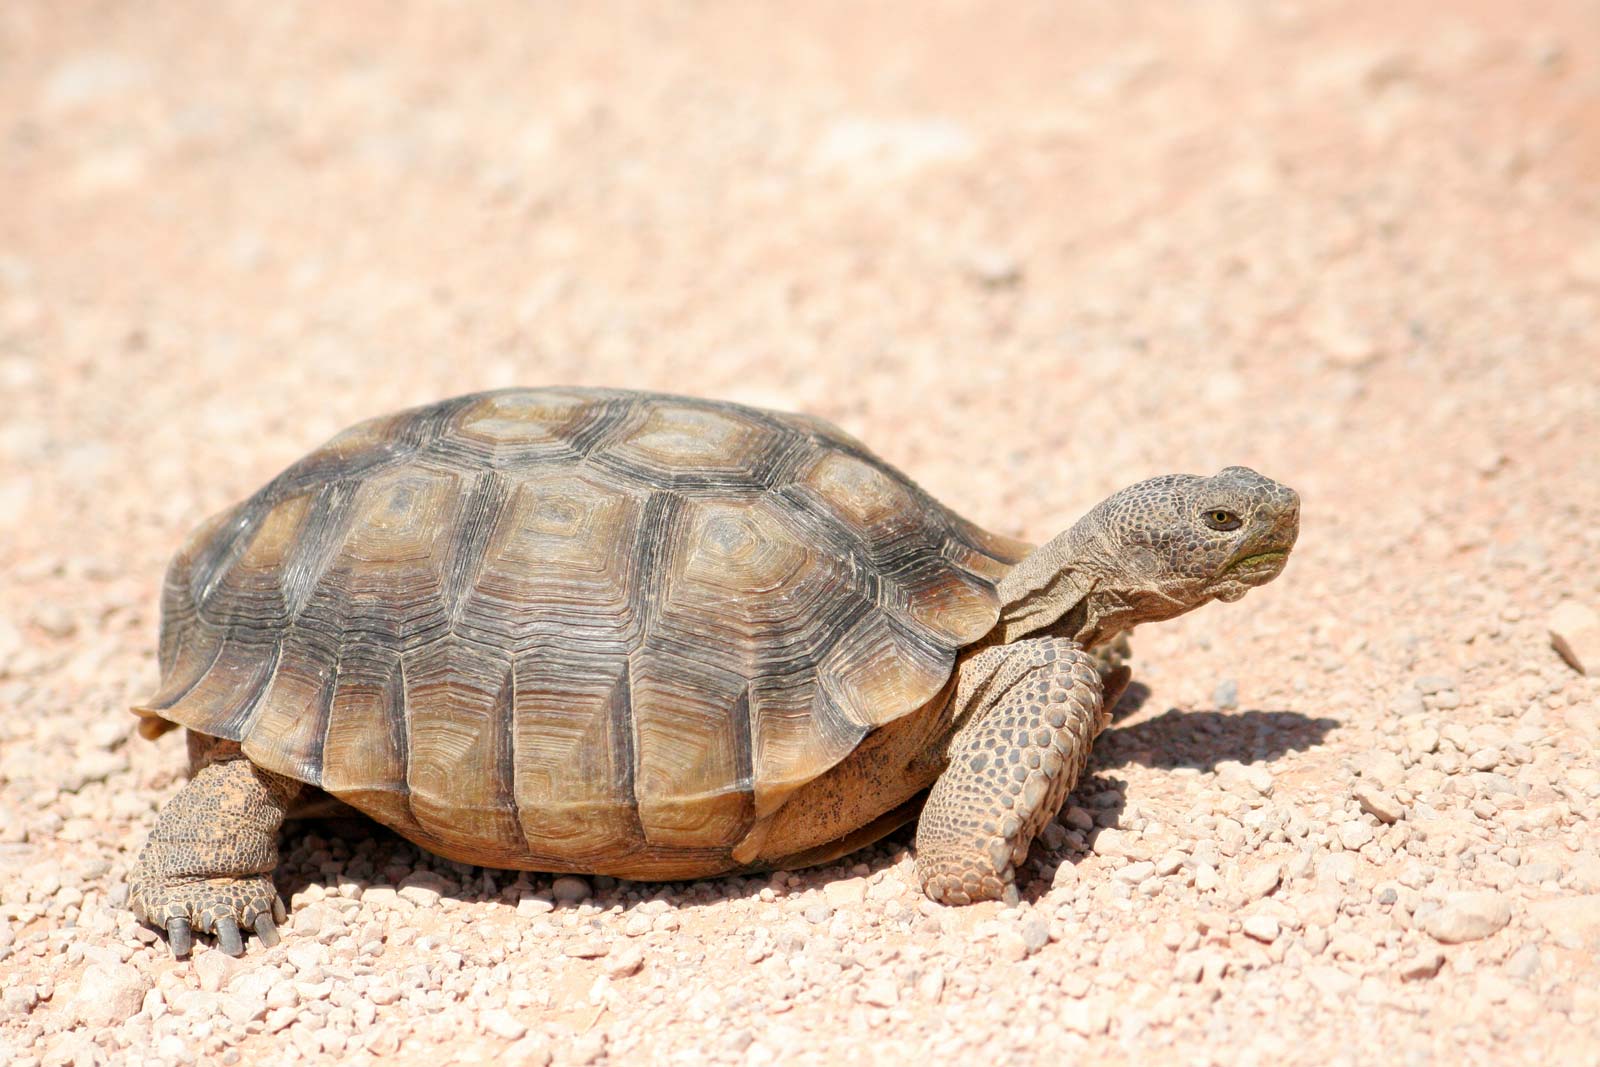 344-Year-Old Tortoise, Alagba Dies After Brief Illness